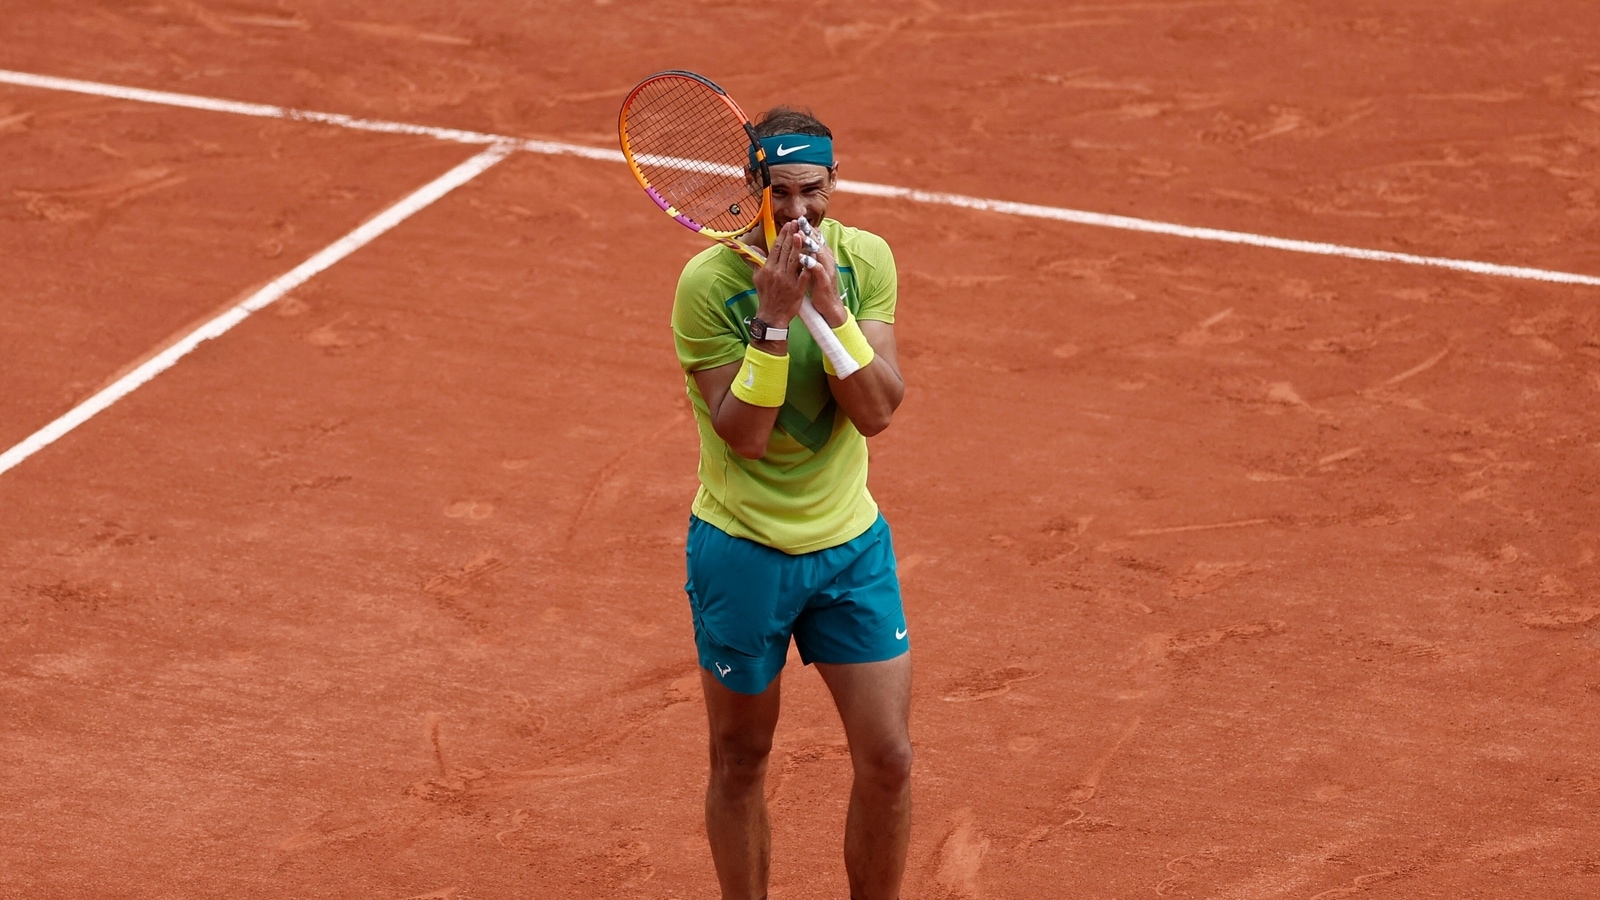 Can Nadal Extend His Grand Slam Record at the French Open? - The